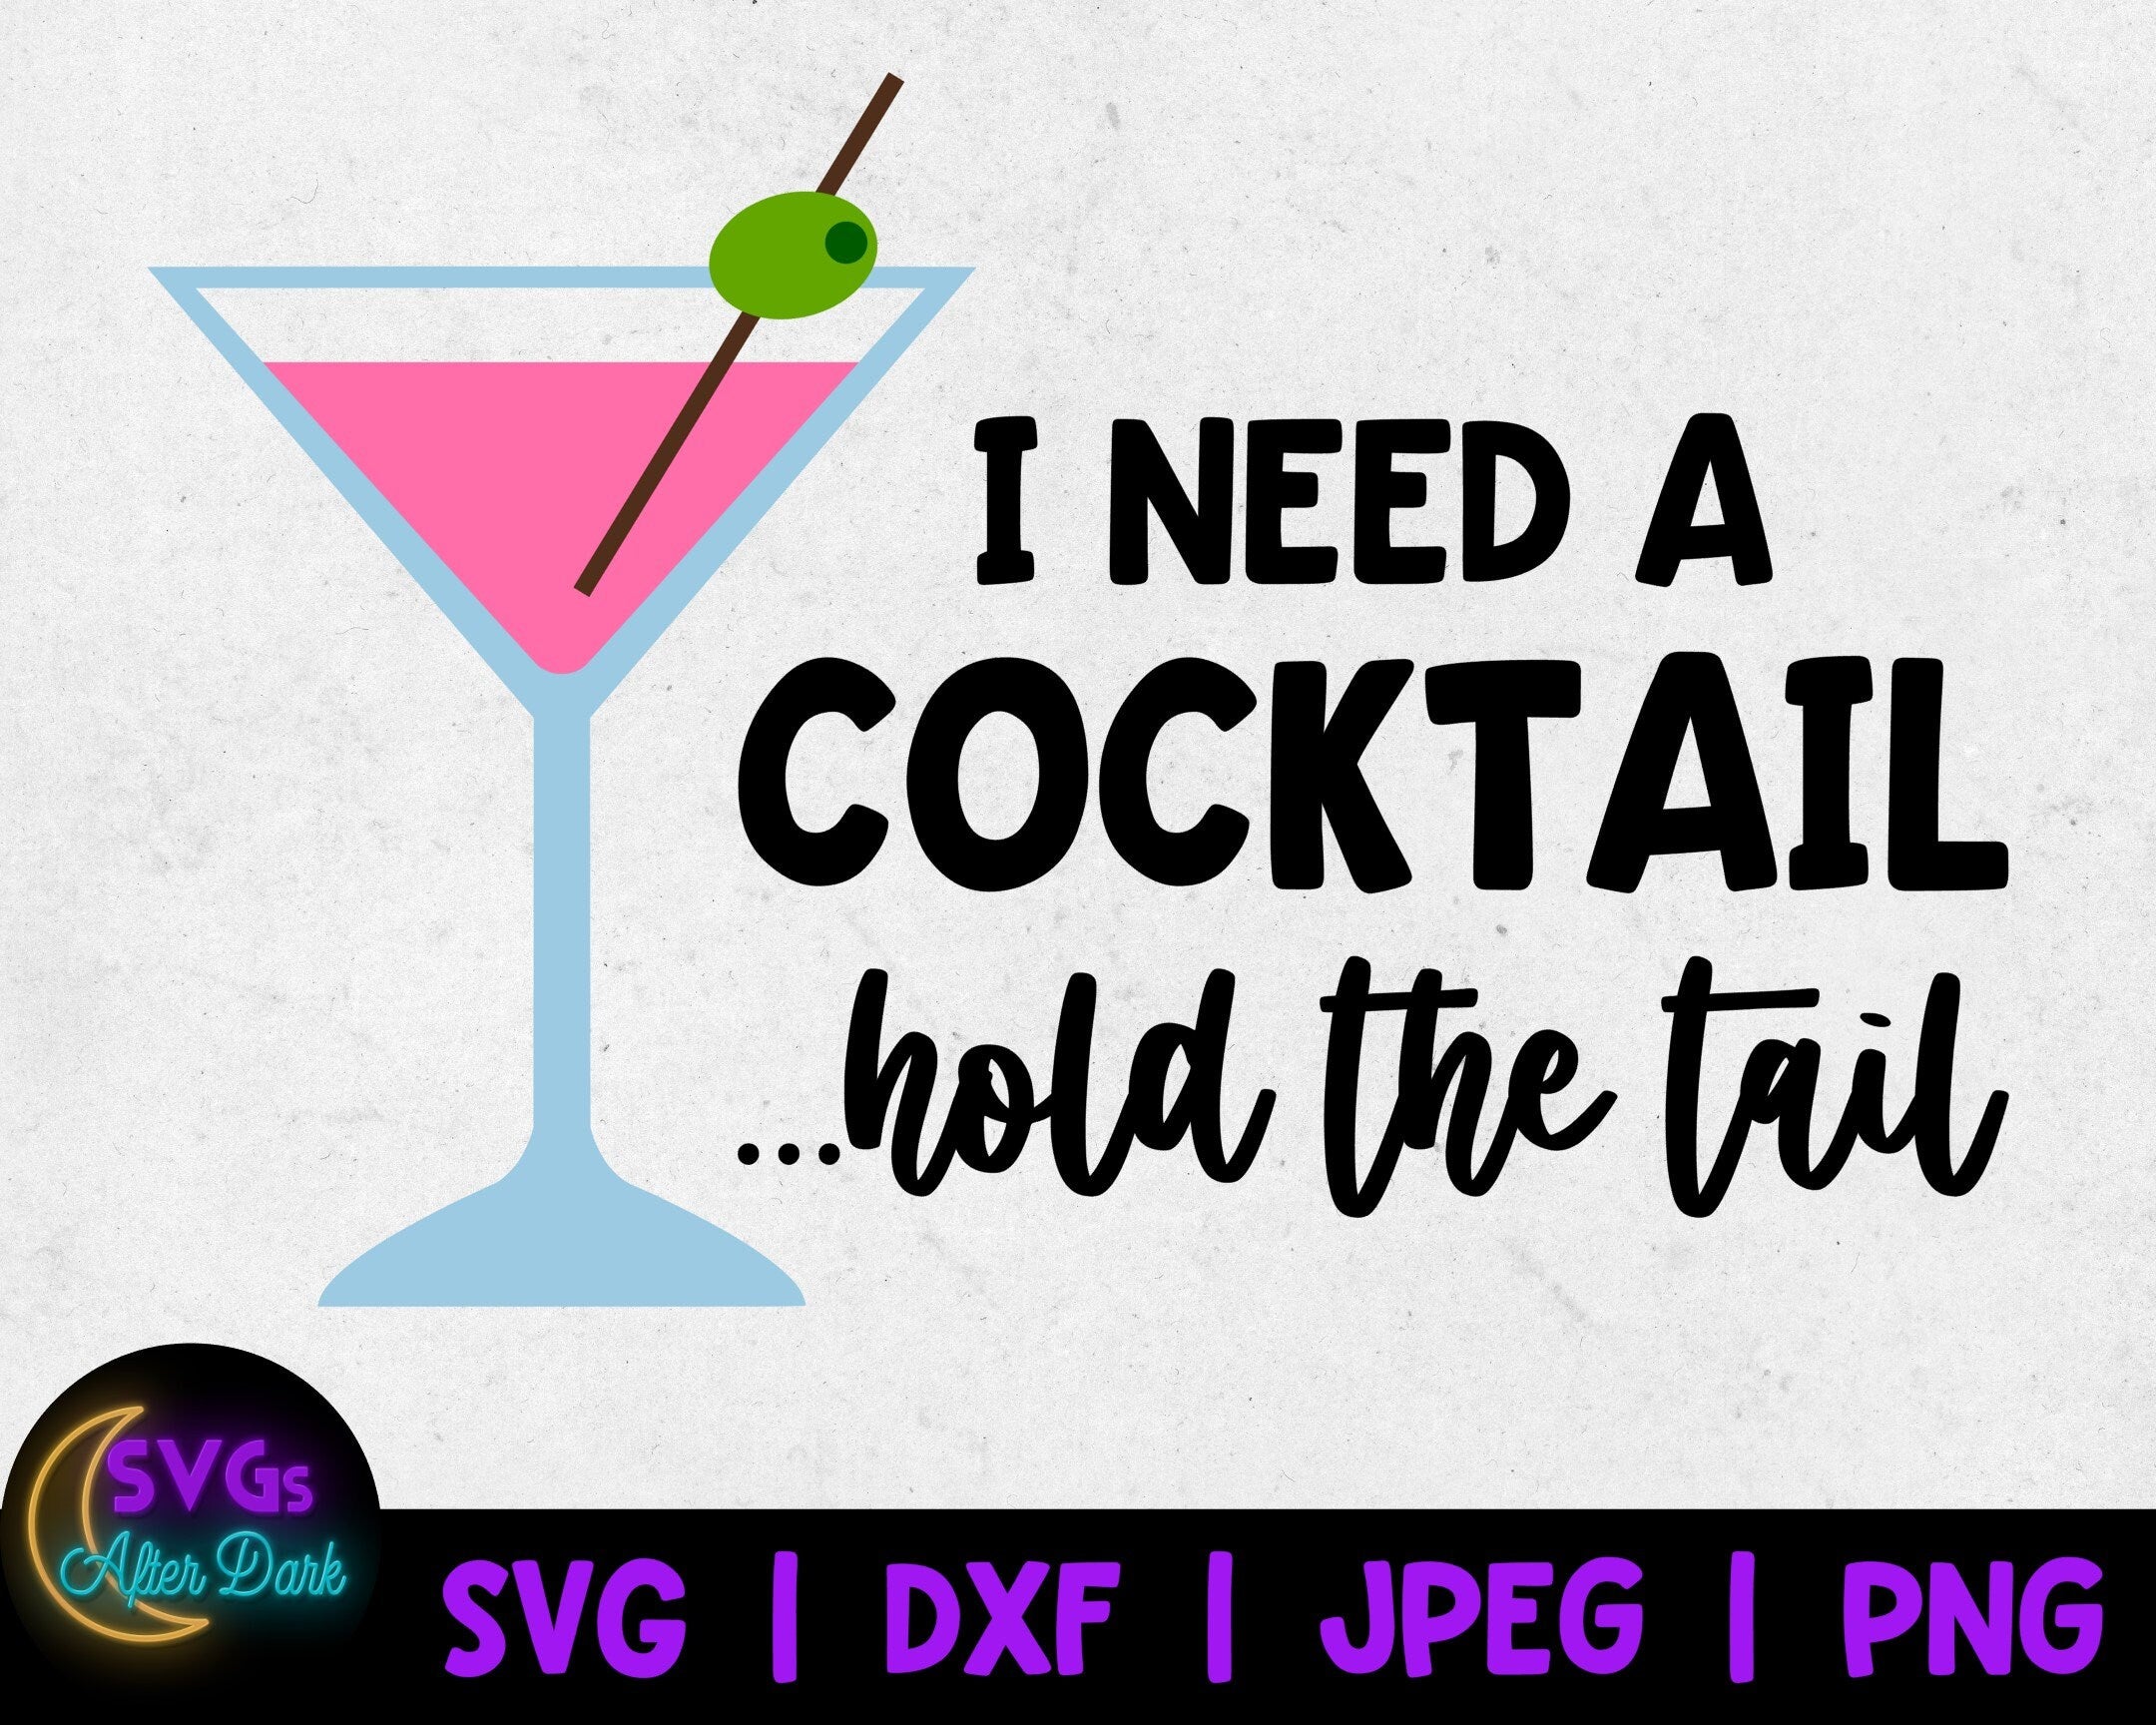 NSFW SVG - I need a Cocktail Hold the Tail SVG - Adult Humor Cricut File